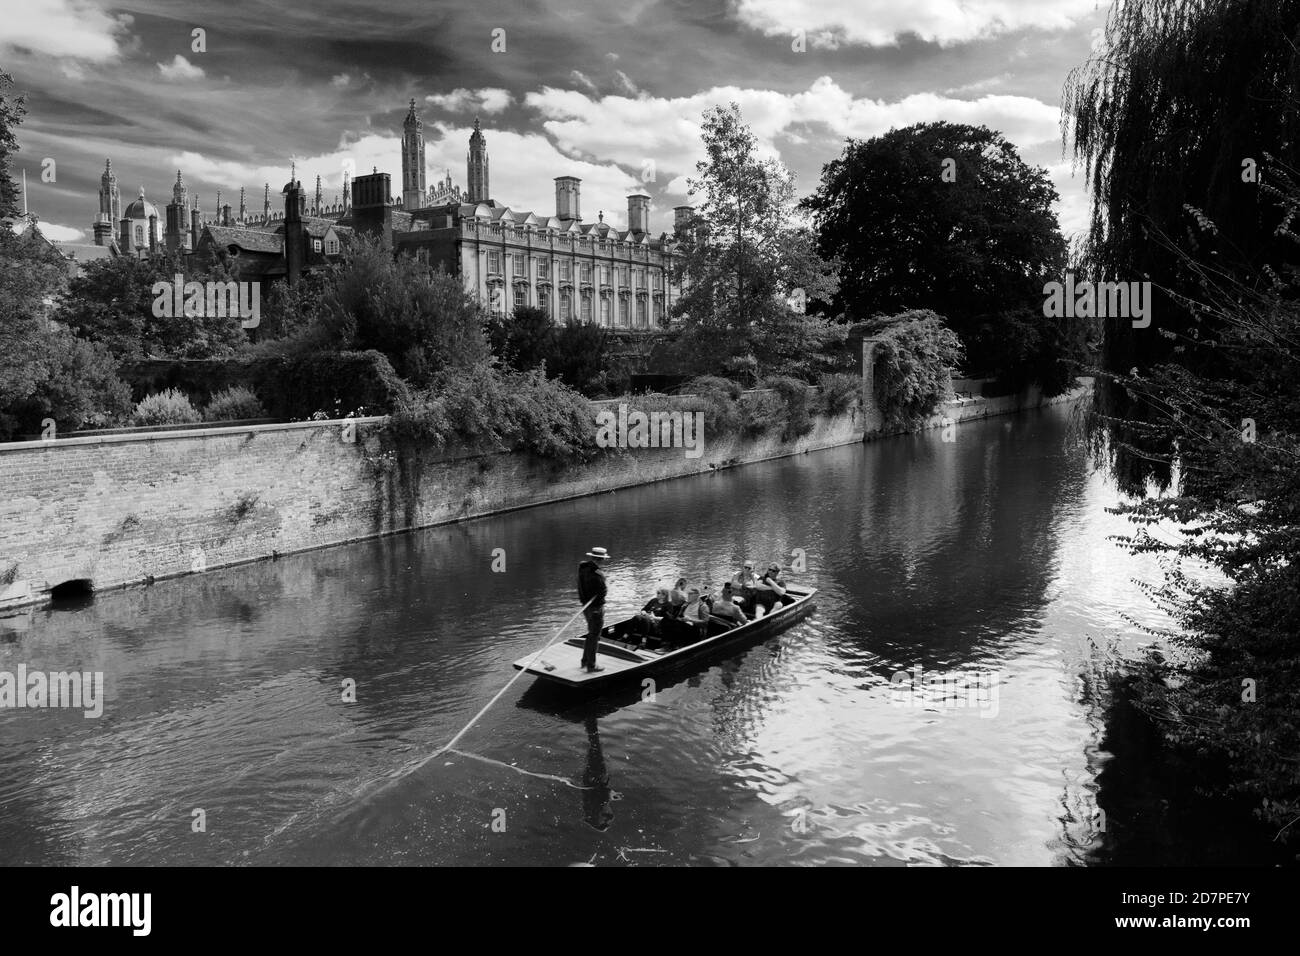 People Punting on the river Cam, Clare College Cambridge City, England, UK Stock Photo